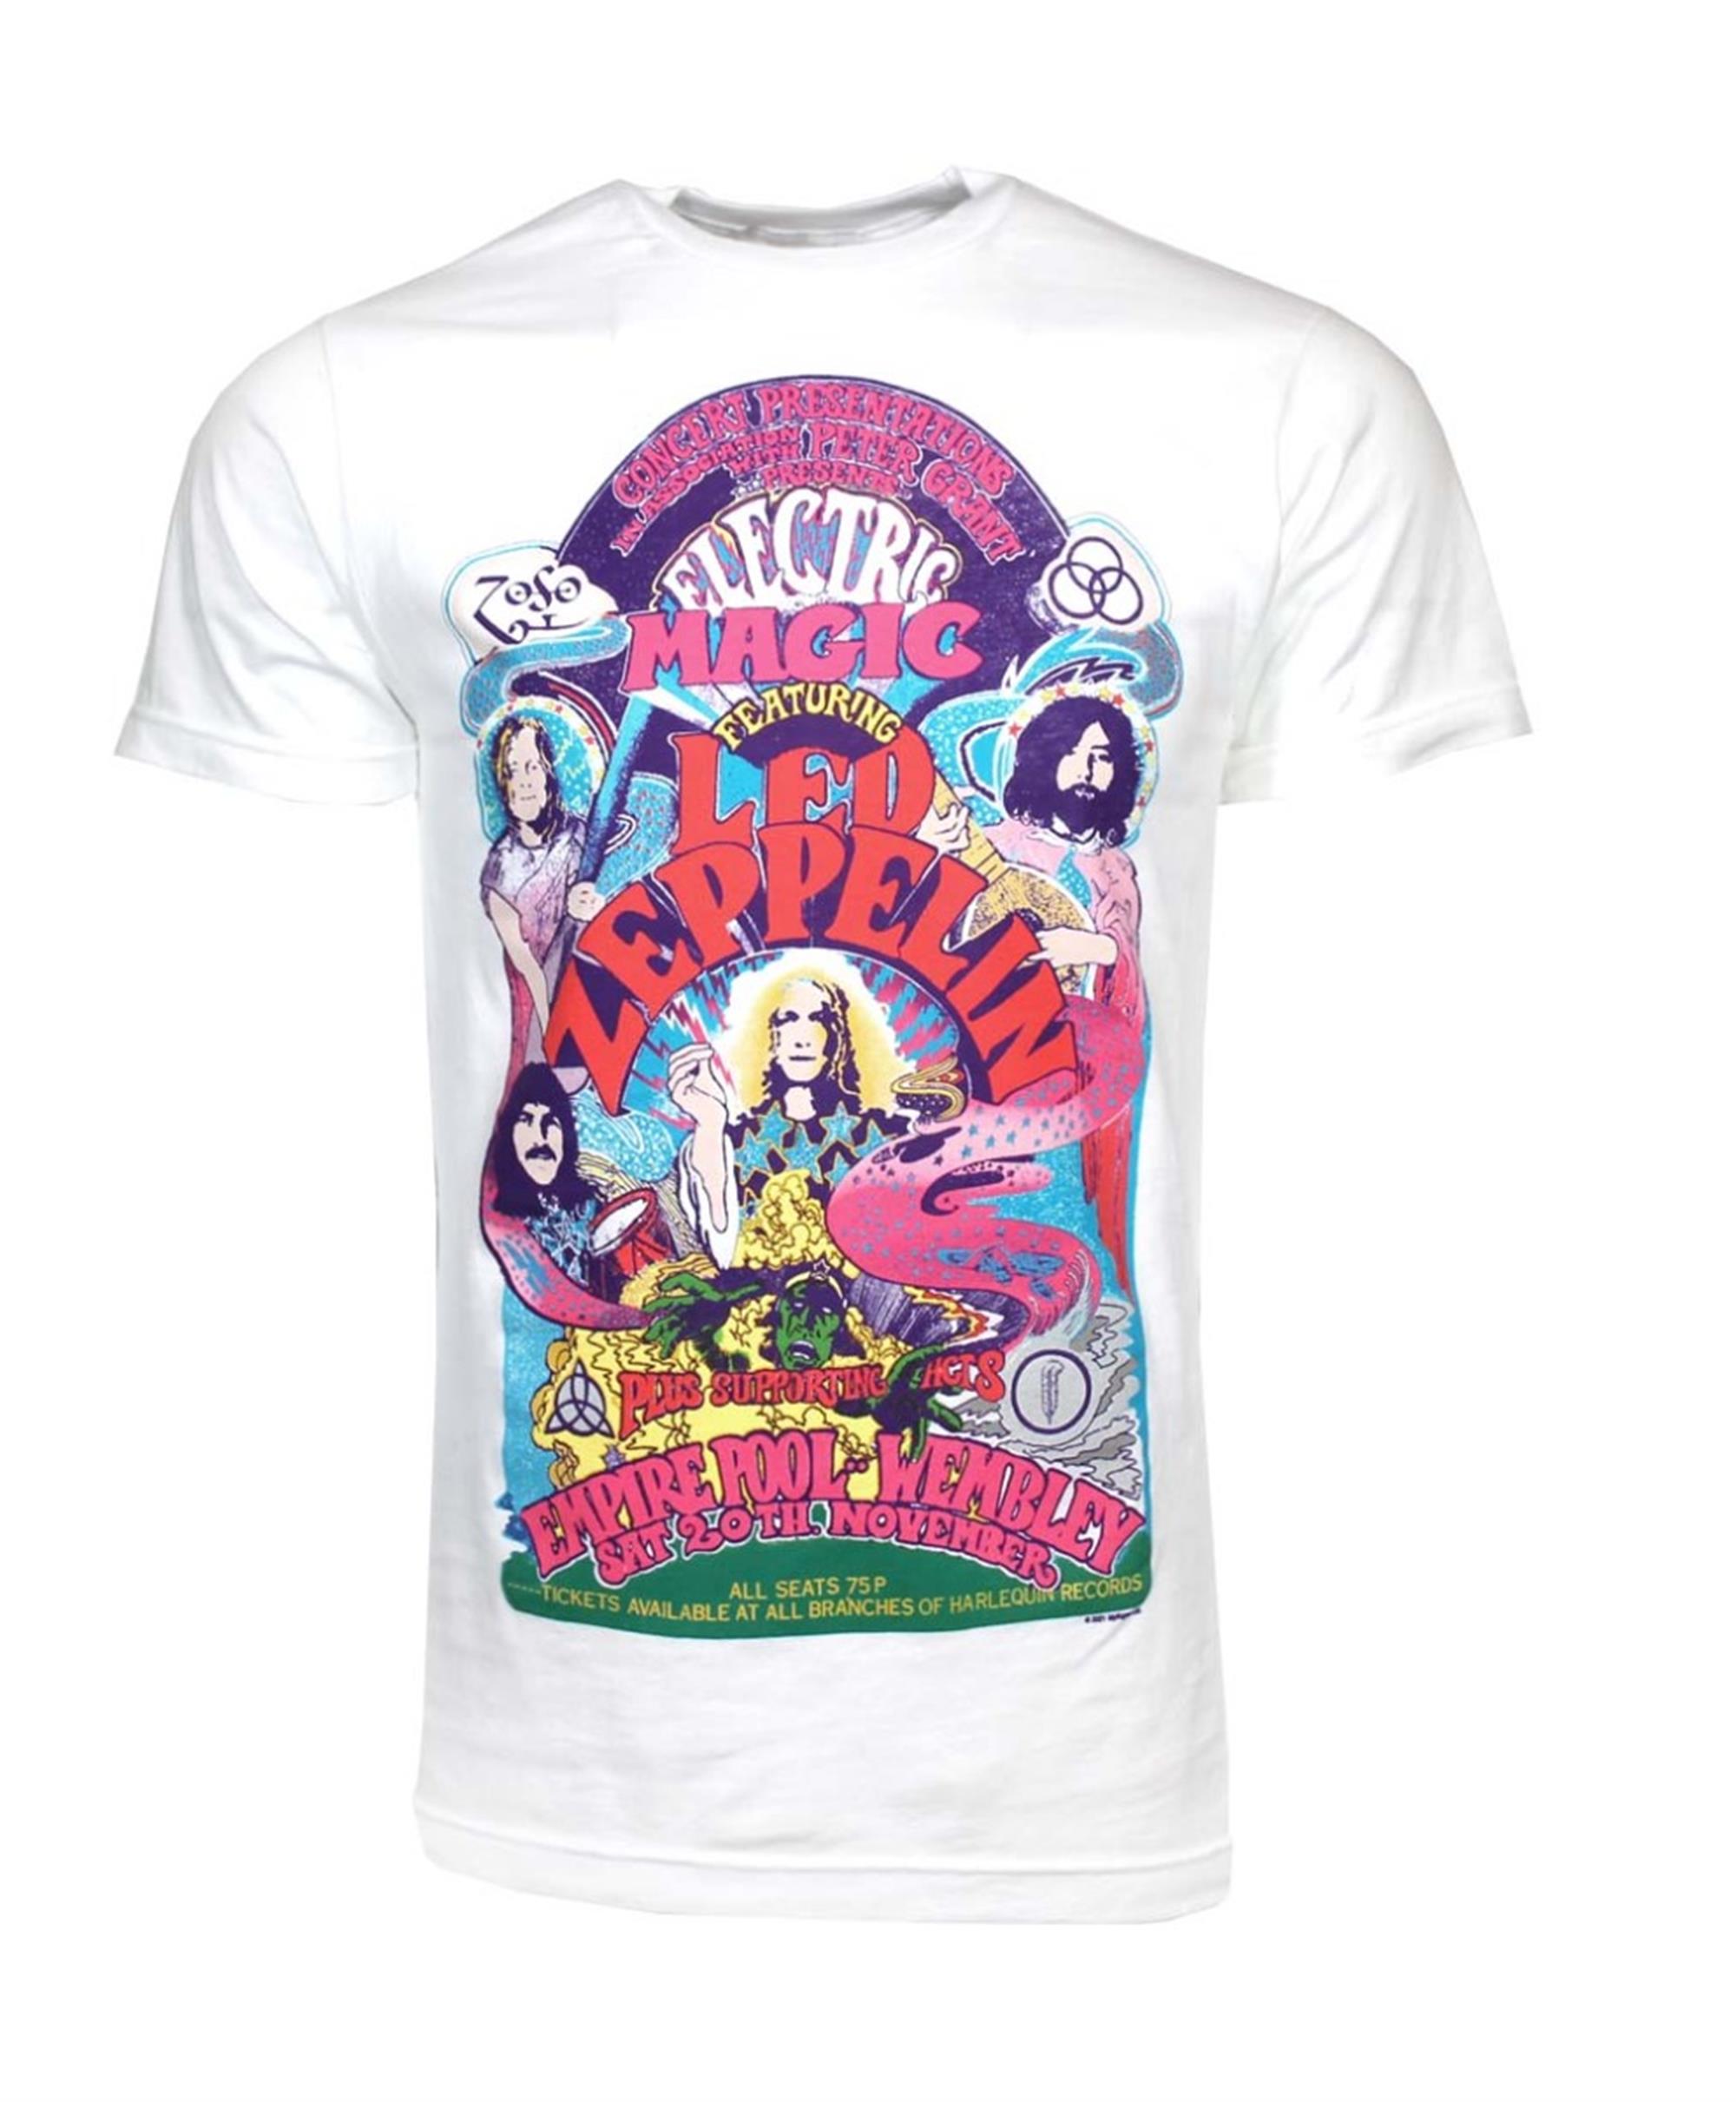 Led Zeppelin Colorful Electric Magic White T-Shirt